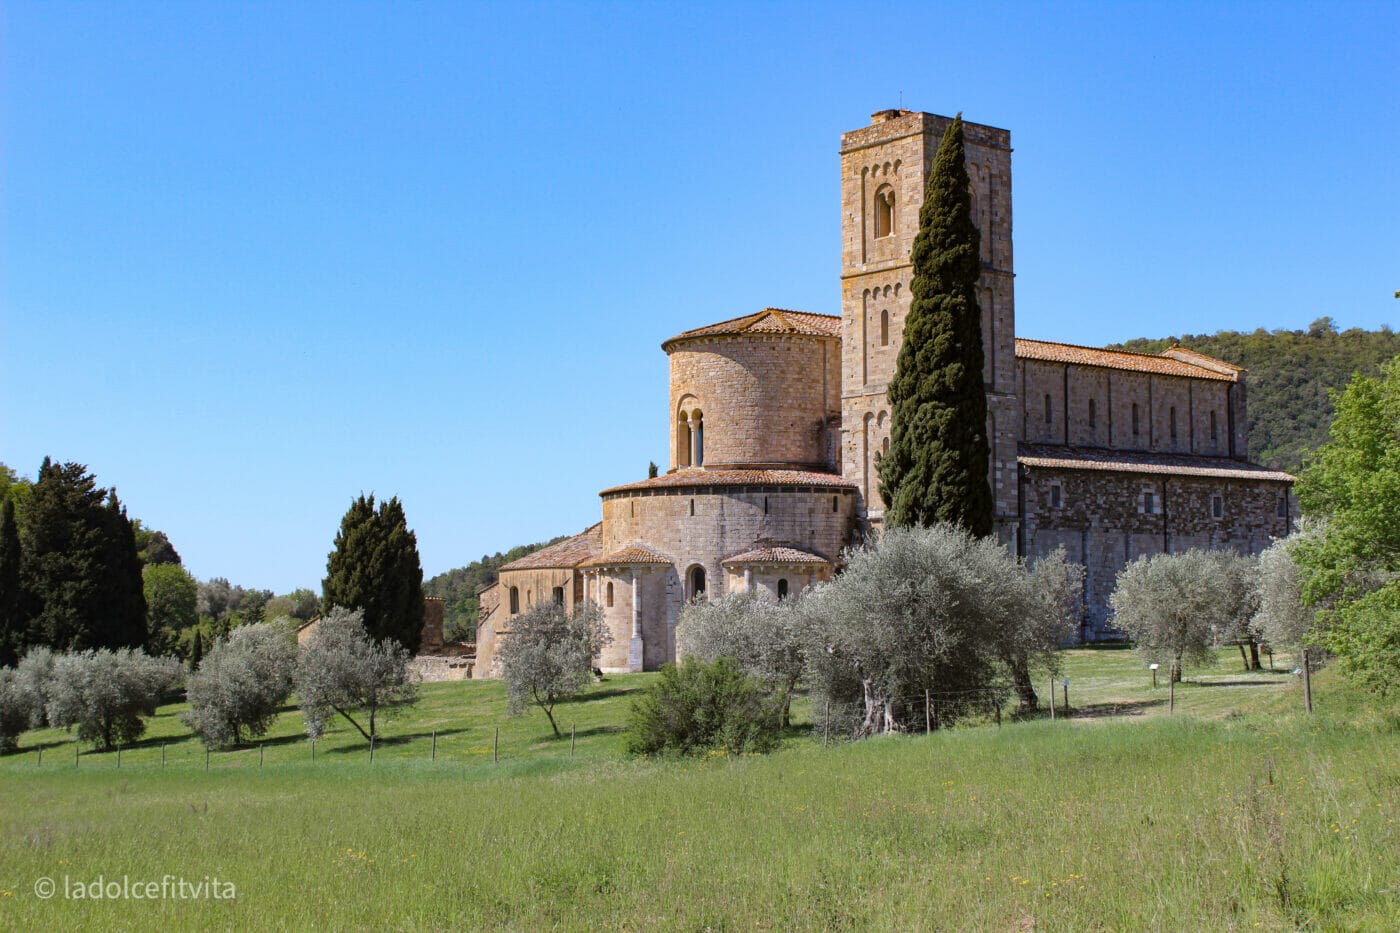 Beautiful stone abbey and benedictine monastery of sant'antimo in the tuscan countryside